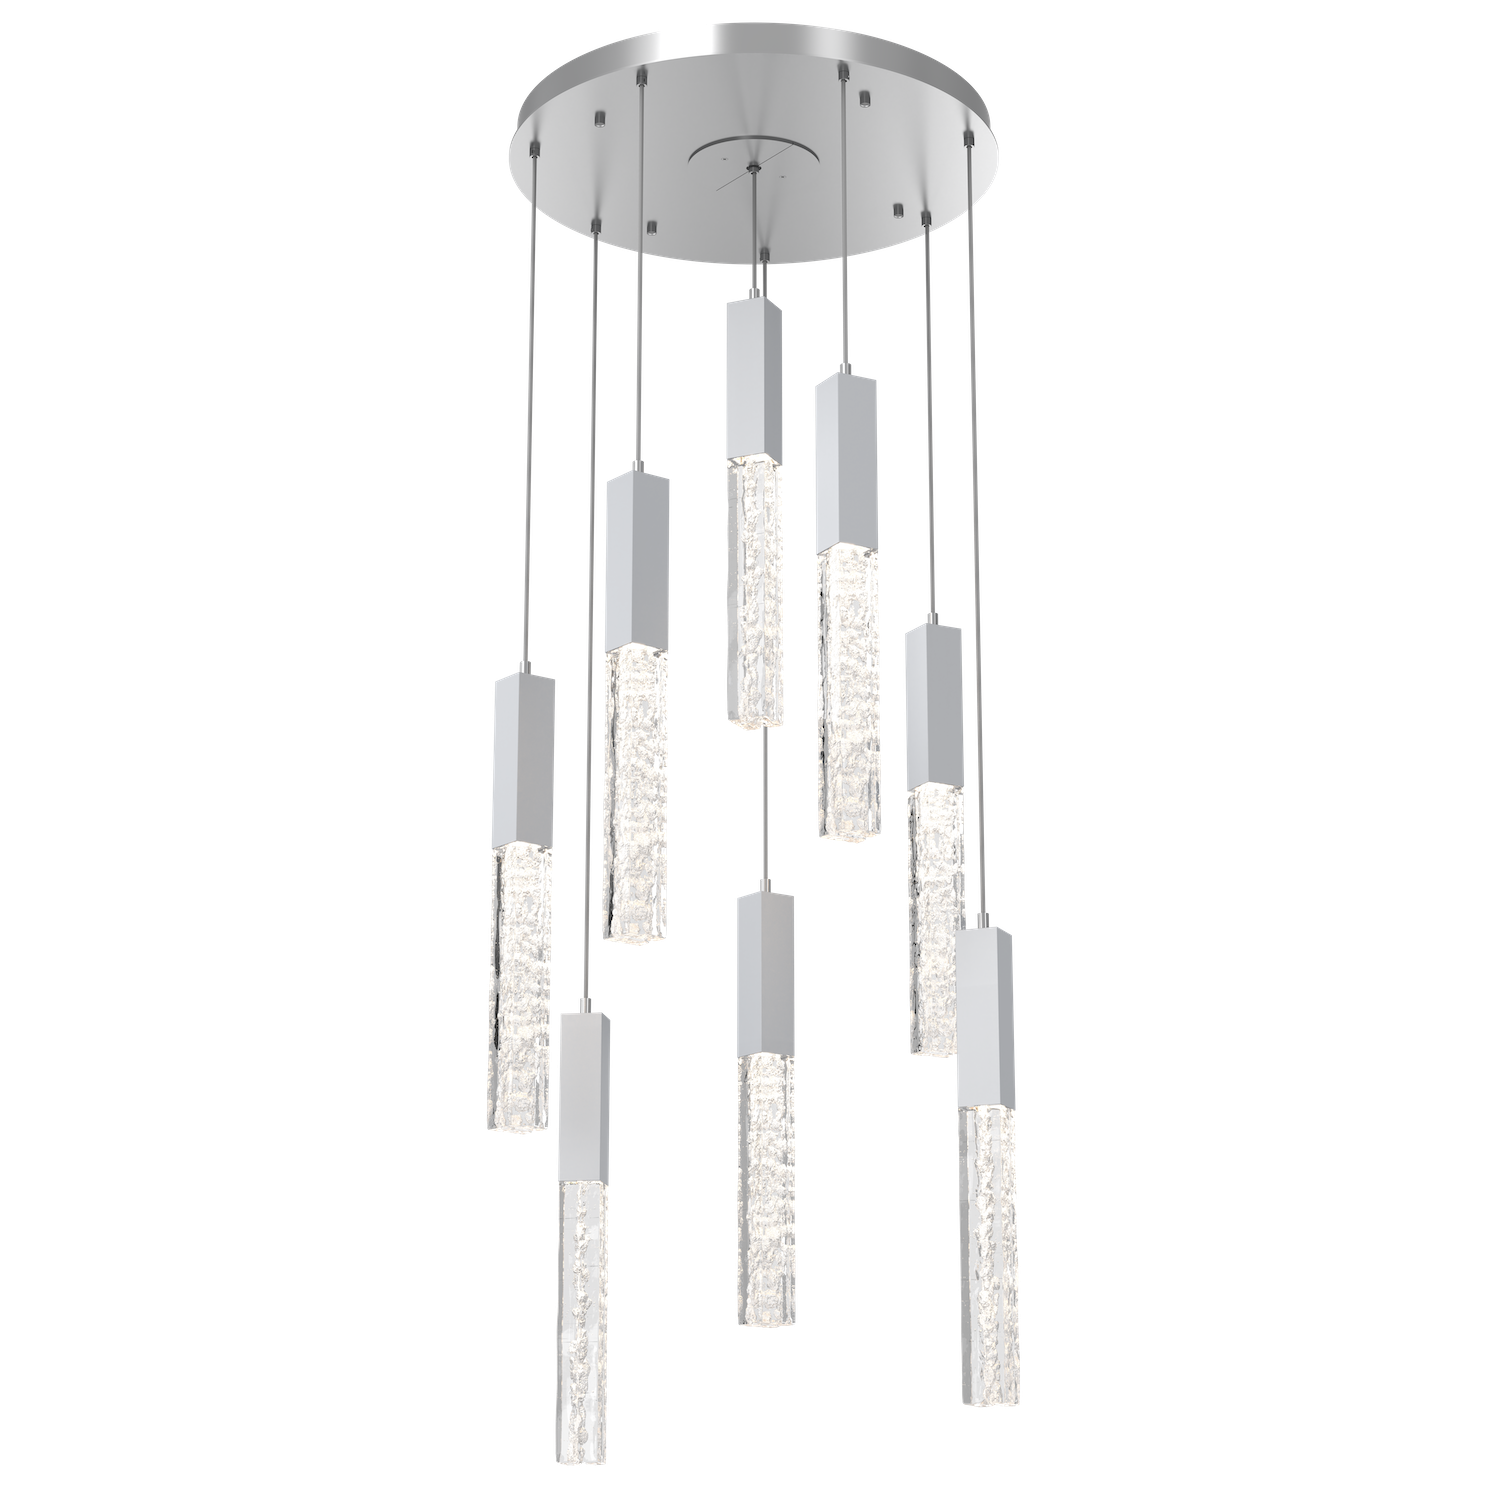 CHB0060-08-CS-GC-Hammerton-Studio-Axis-8-Light-Pendant-Chandelier-with-Classic-Silver-finish-and-clear-cast-glass-and-LED-lamping